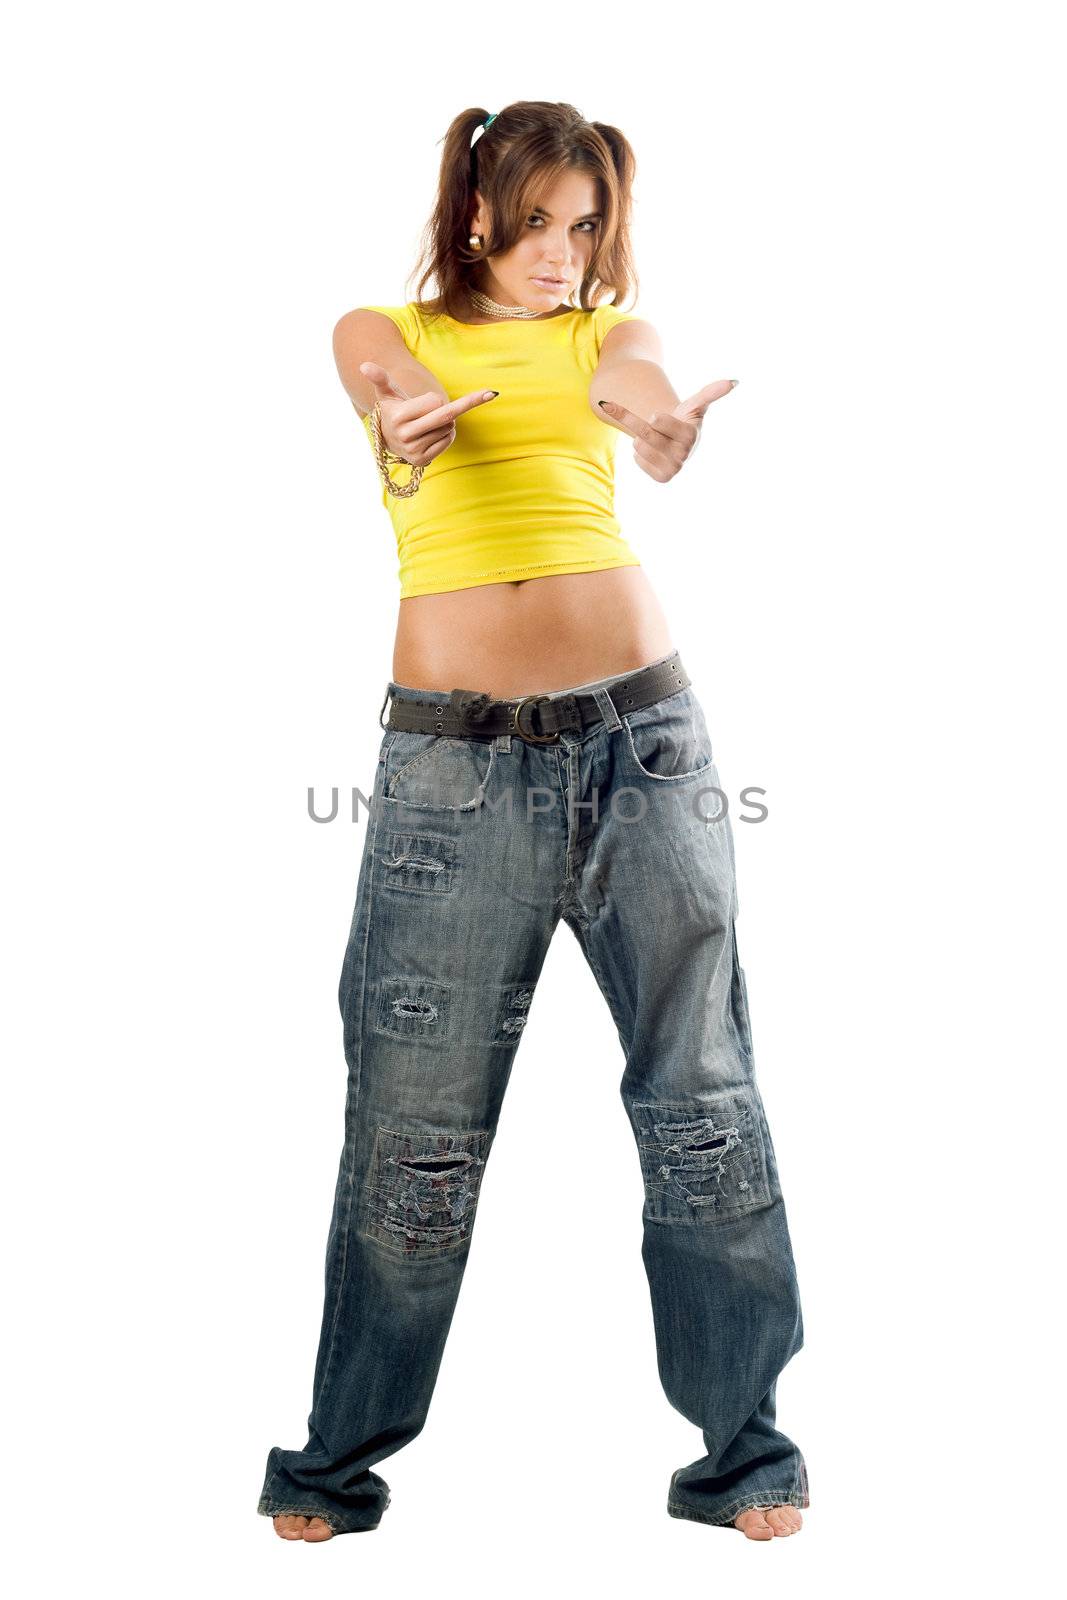 Young woman wearing wide jeans and gesturing. Isolated